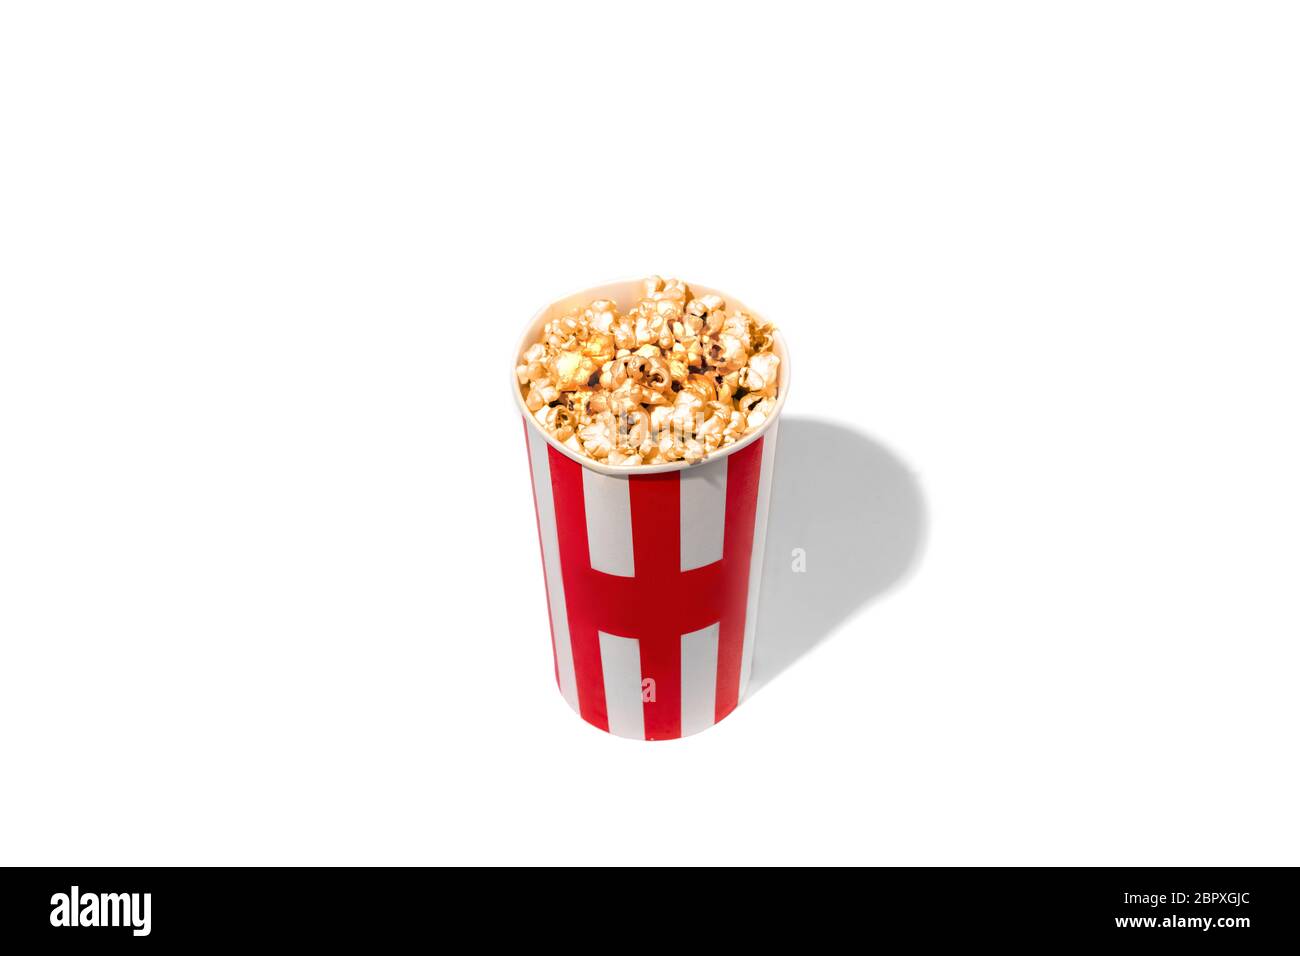 Striped white red bucket full of popcorn isolated on white studio background with copyspace for advertising. Entertainment, food, traditional snacks, time for cinema and having fun, tasty. Stock Photo